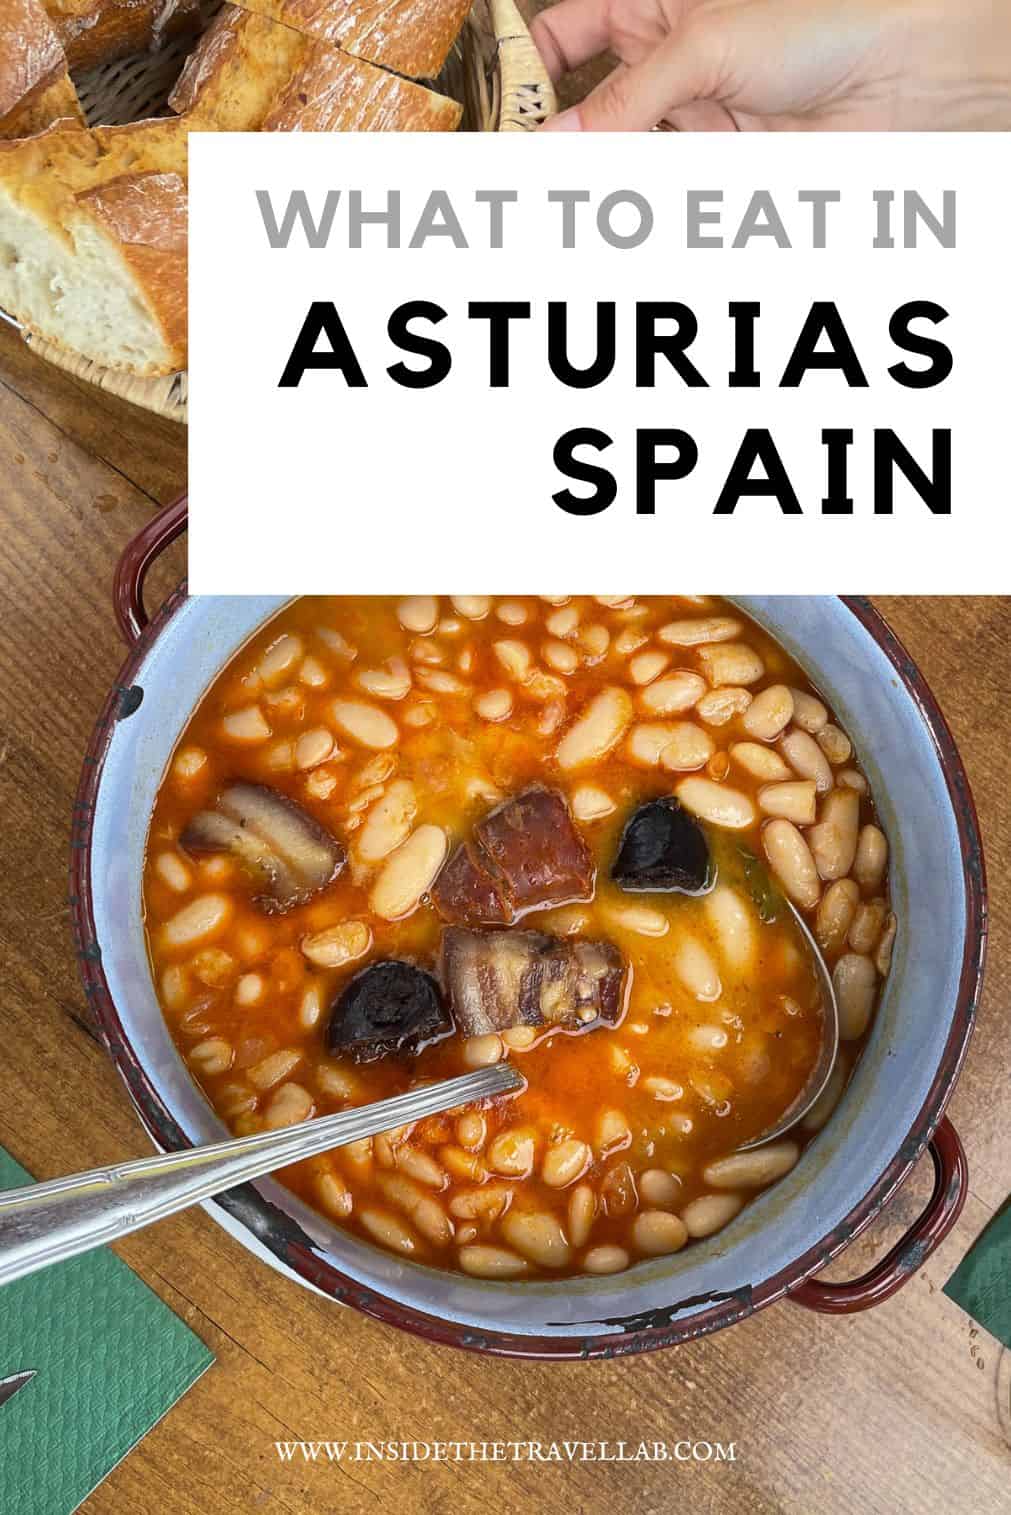 What to eat in Asturias Spain cover image